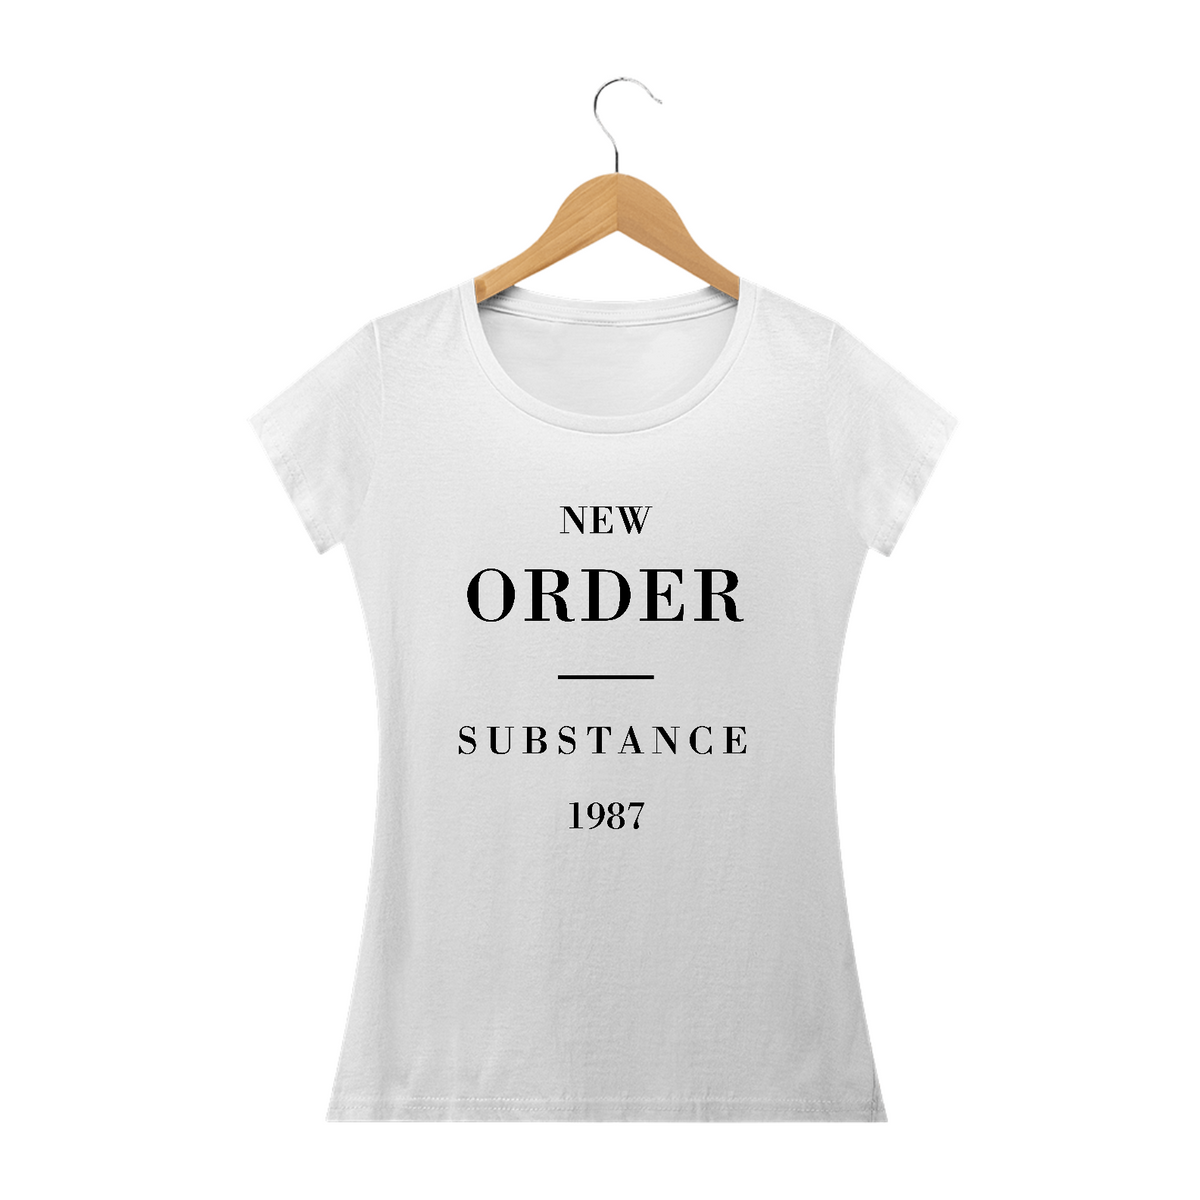 Nome do produto: BABY LOOK - NEW ORDER - SUBSTANCE